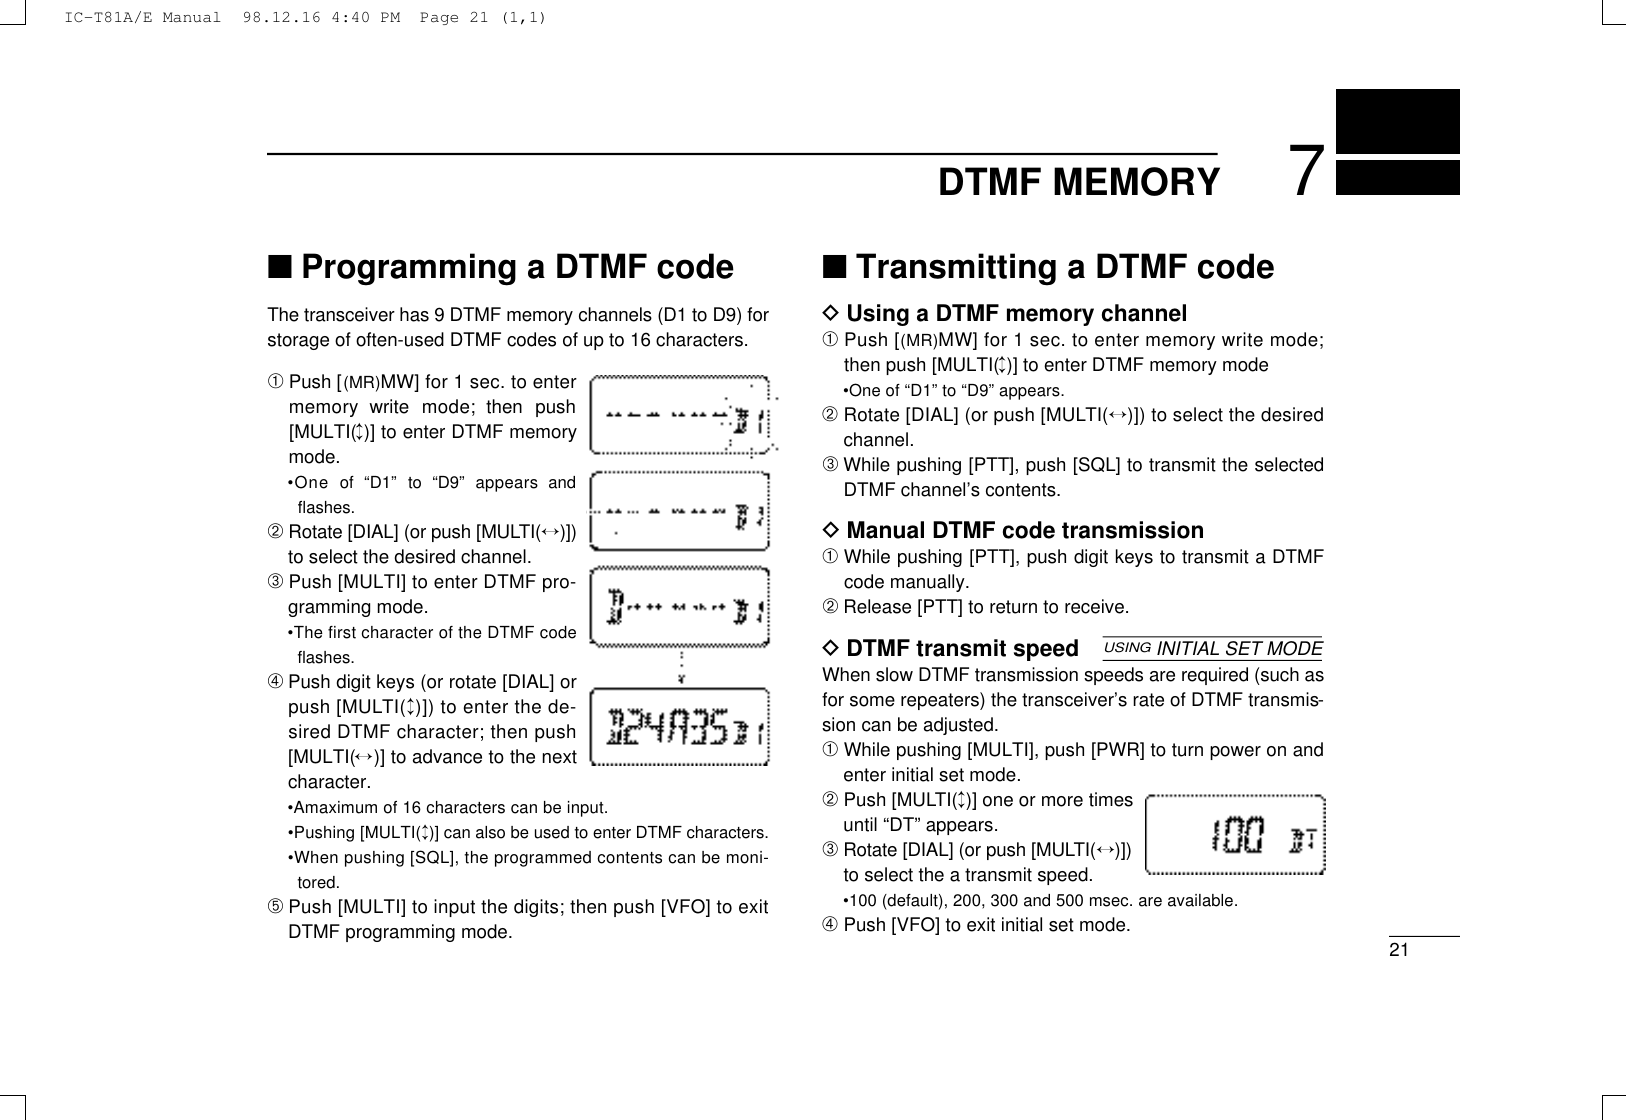 217DTMF MEMORY■Programming a DTMF codeThe transceiver has 9 DTMF memory channels (D1 to D9) forstorage of often-used DTMF codes of up to 16 characters.➀Push [( M R )MW] for 1 sec. to entermemory  write  mode;  then  push[MULTI(↕)] to enter DTMF memorymode.•One  of  “D1”  to  “D9”  appears  andﬂashes.➁Rotate [DIAL] (or push [MULT I (↔) ] )to select the desired channel.➂Push [MULTI] to enter DTMF pro-gramming mode.•The ﬁrst character of the DTMF codeﬂashes.➃Push digit keys (or rotate [DIAL] orpush [MULT I (↕)]) to enter the de-sired DTMF character; then push[MULTI(↔)] to advance to the nextcharacter.•Amaximum of 16 characters can be input.•Pushing [MULTI(↕)] can also be used to enter DTMF characters.•When pushing [SQL], the programmed contents can be moni-tored.➄Push [MULTI] to input the digits; then push [VFO] to exitDTMF programming mode.■Transmitting a DTMF codeDUsing a DTMF memory channel➀Push [( M R )MW] for 1 sec. to enter memory write mode;then push [MULTI(↕)] to enter DTMF memory mode•One of “D1” to “D9” appears.➁Rotate [DIAL] (or push [MULT I (↔)]) to select the desiredchannel.➂While pushing [PTT], push [SQL] to transmit the selectedDTMF channel’s contents.DManual DTMF code transmission➀While pushing [PTT], push digit keys to transmit a DTMFcode manually.➁Release [PTT] to return to receive.DDTMF transmit speedWhen slow DTMF transmission speeds are required (such asfor some repeaters) the transceiver’s rate of DTMF transmis-sion can be adjusted.➀While pushing [MULTI], push [PWR] to turn power on andenter initial set mode.➁Push [MULT I (↕)] one or more timesuntil “DT” appears.➂Rotate [DIAL] (or push [MULT I (↔) ] )to select the a transmit speed.•100 (default), 200, 300 and 500 msec. are available.➃Push [VFO] to exit initial set mode.USINGINITIAL SET MODEIC-T81A/E Manual  98.12.16 4:40 PM  Page 21 (1,1)